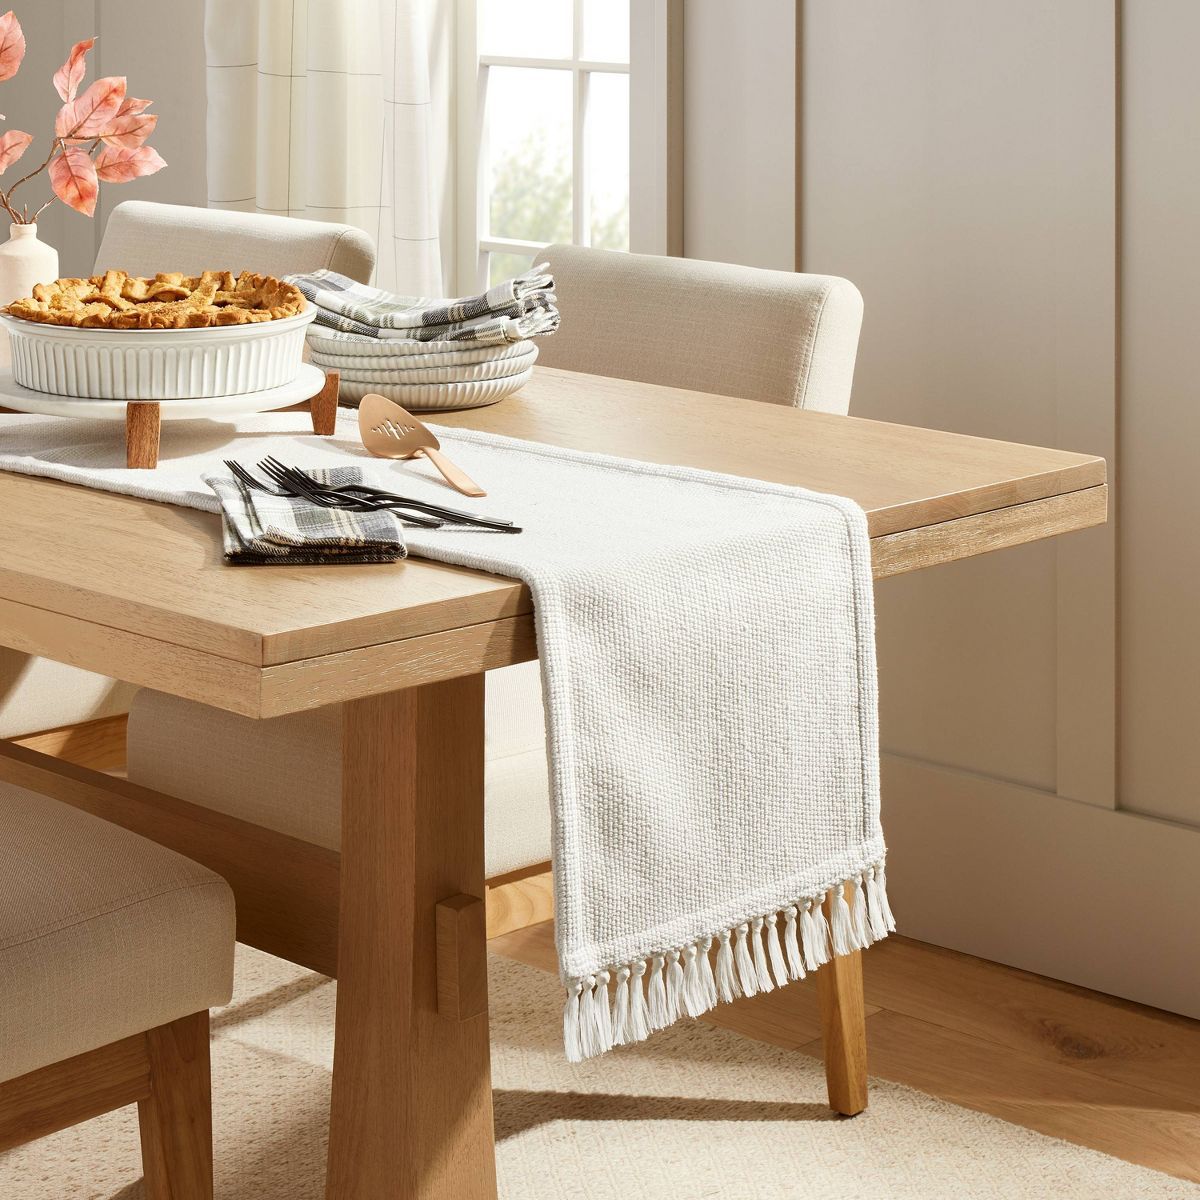 Pebble Textured Woven Table Runner - Hearth & Hand™ with Magnolia | Target